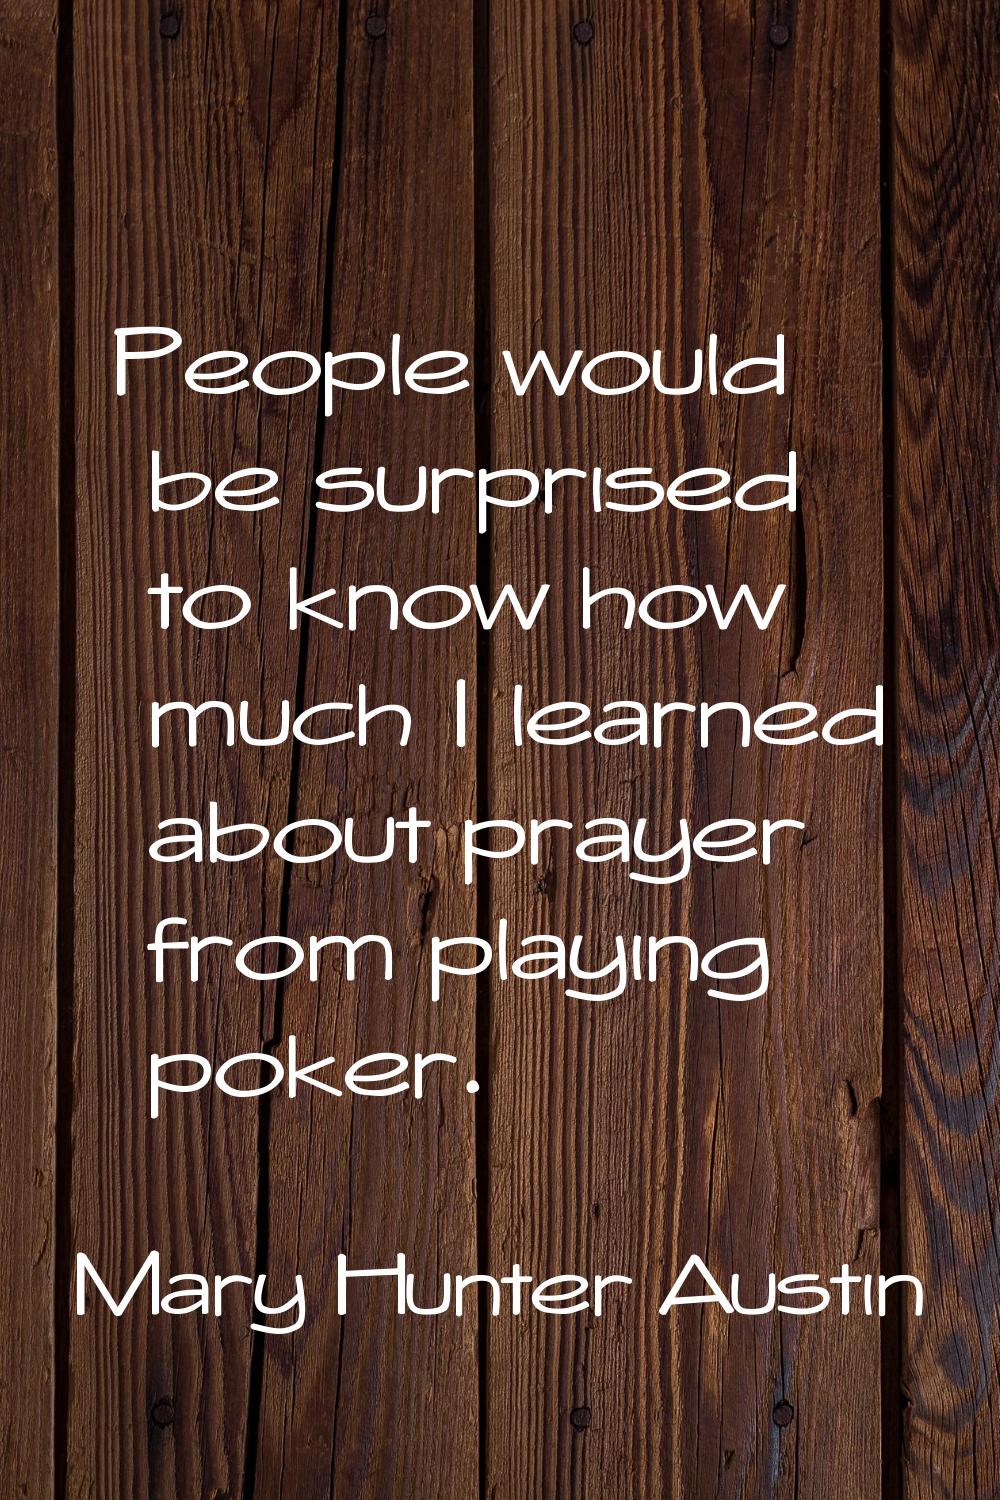 People would be surprised to know how much I learned about prayer from playing poker.